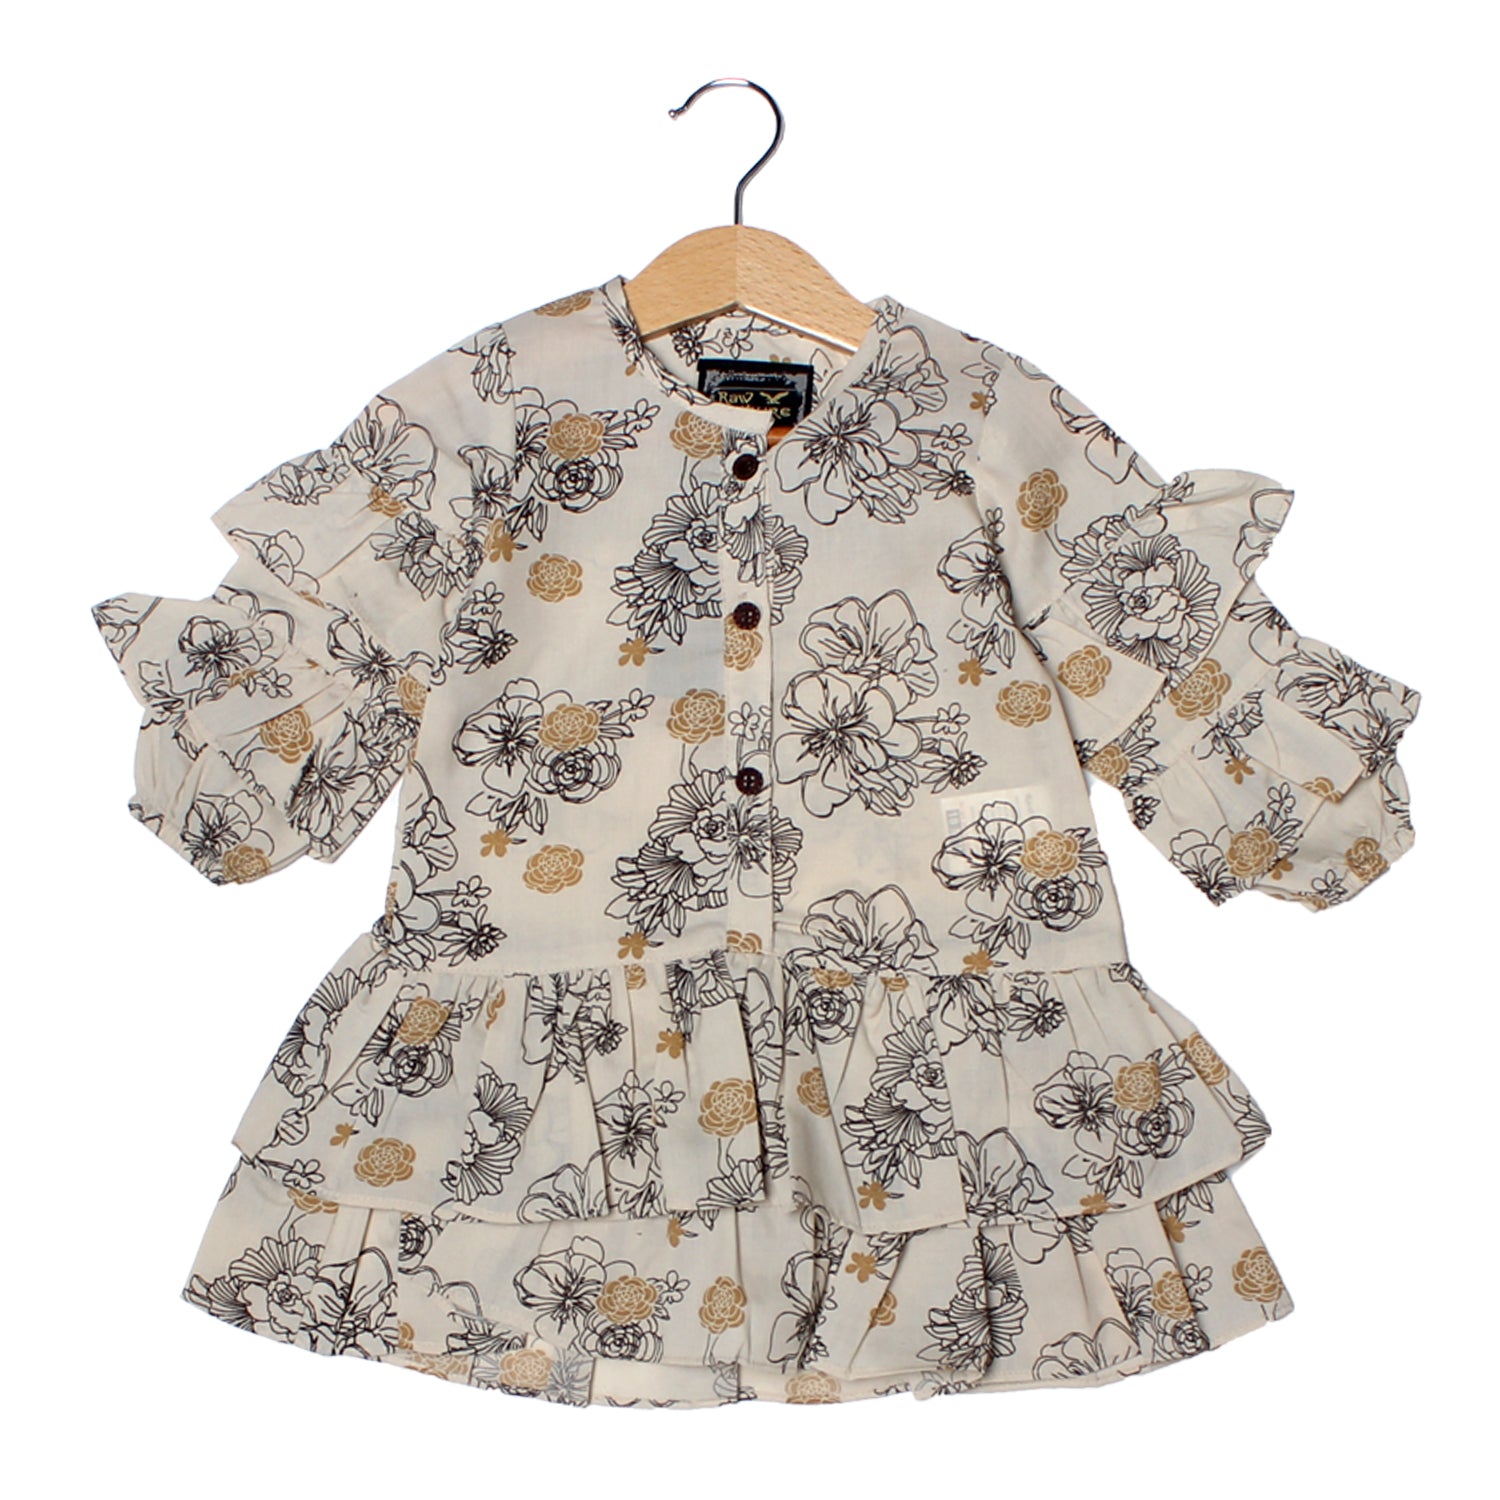 NEW CREAM FLOWERS PRINTED COTTON FULL SLEEVES FROCK